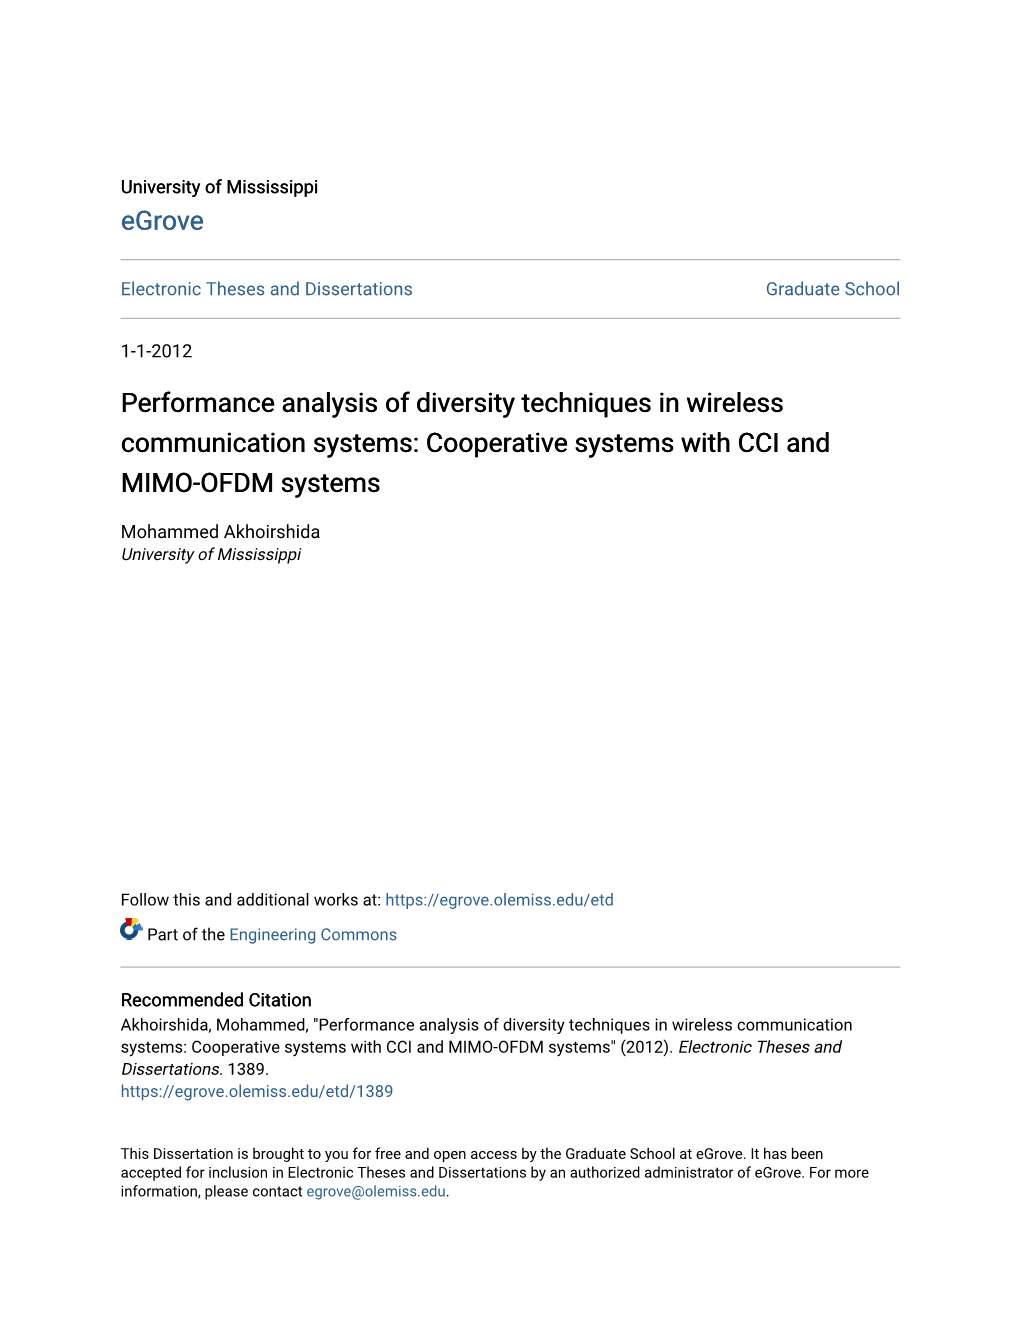 Performance Analysis of Diversity Techniques in Wireless Communication Systems: Cooperative Systems with CCI and MIMO-OFDM Systems